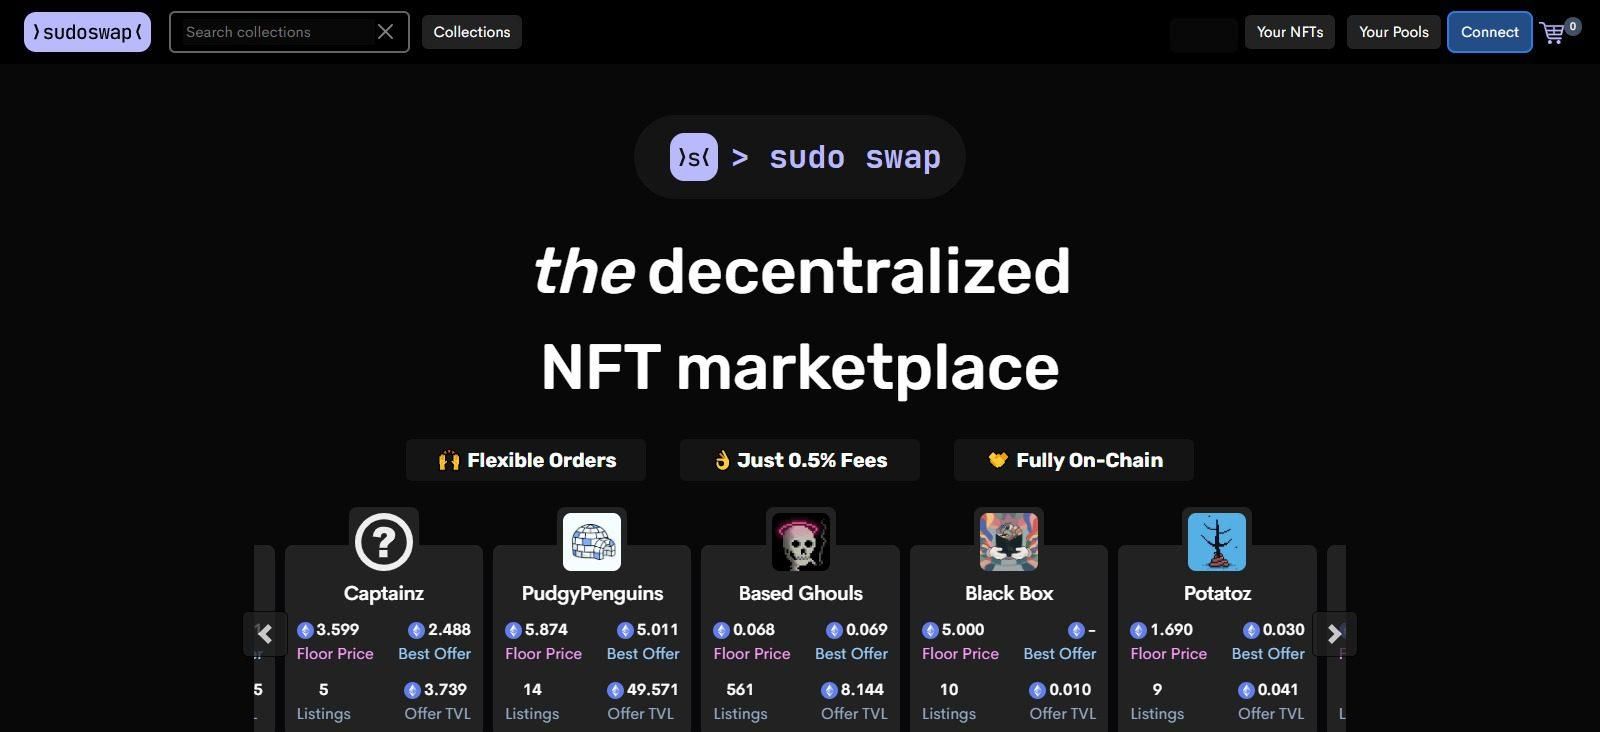 Sudoswap Airdrop Review: Able to Claim Free SUDO Tokens